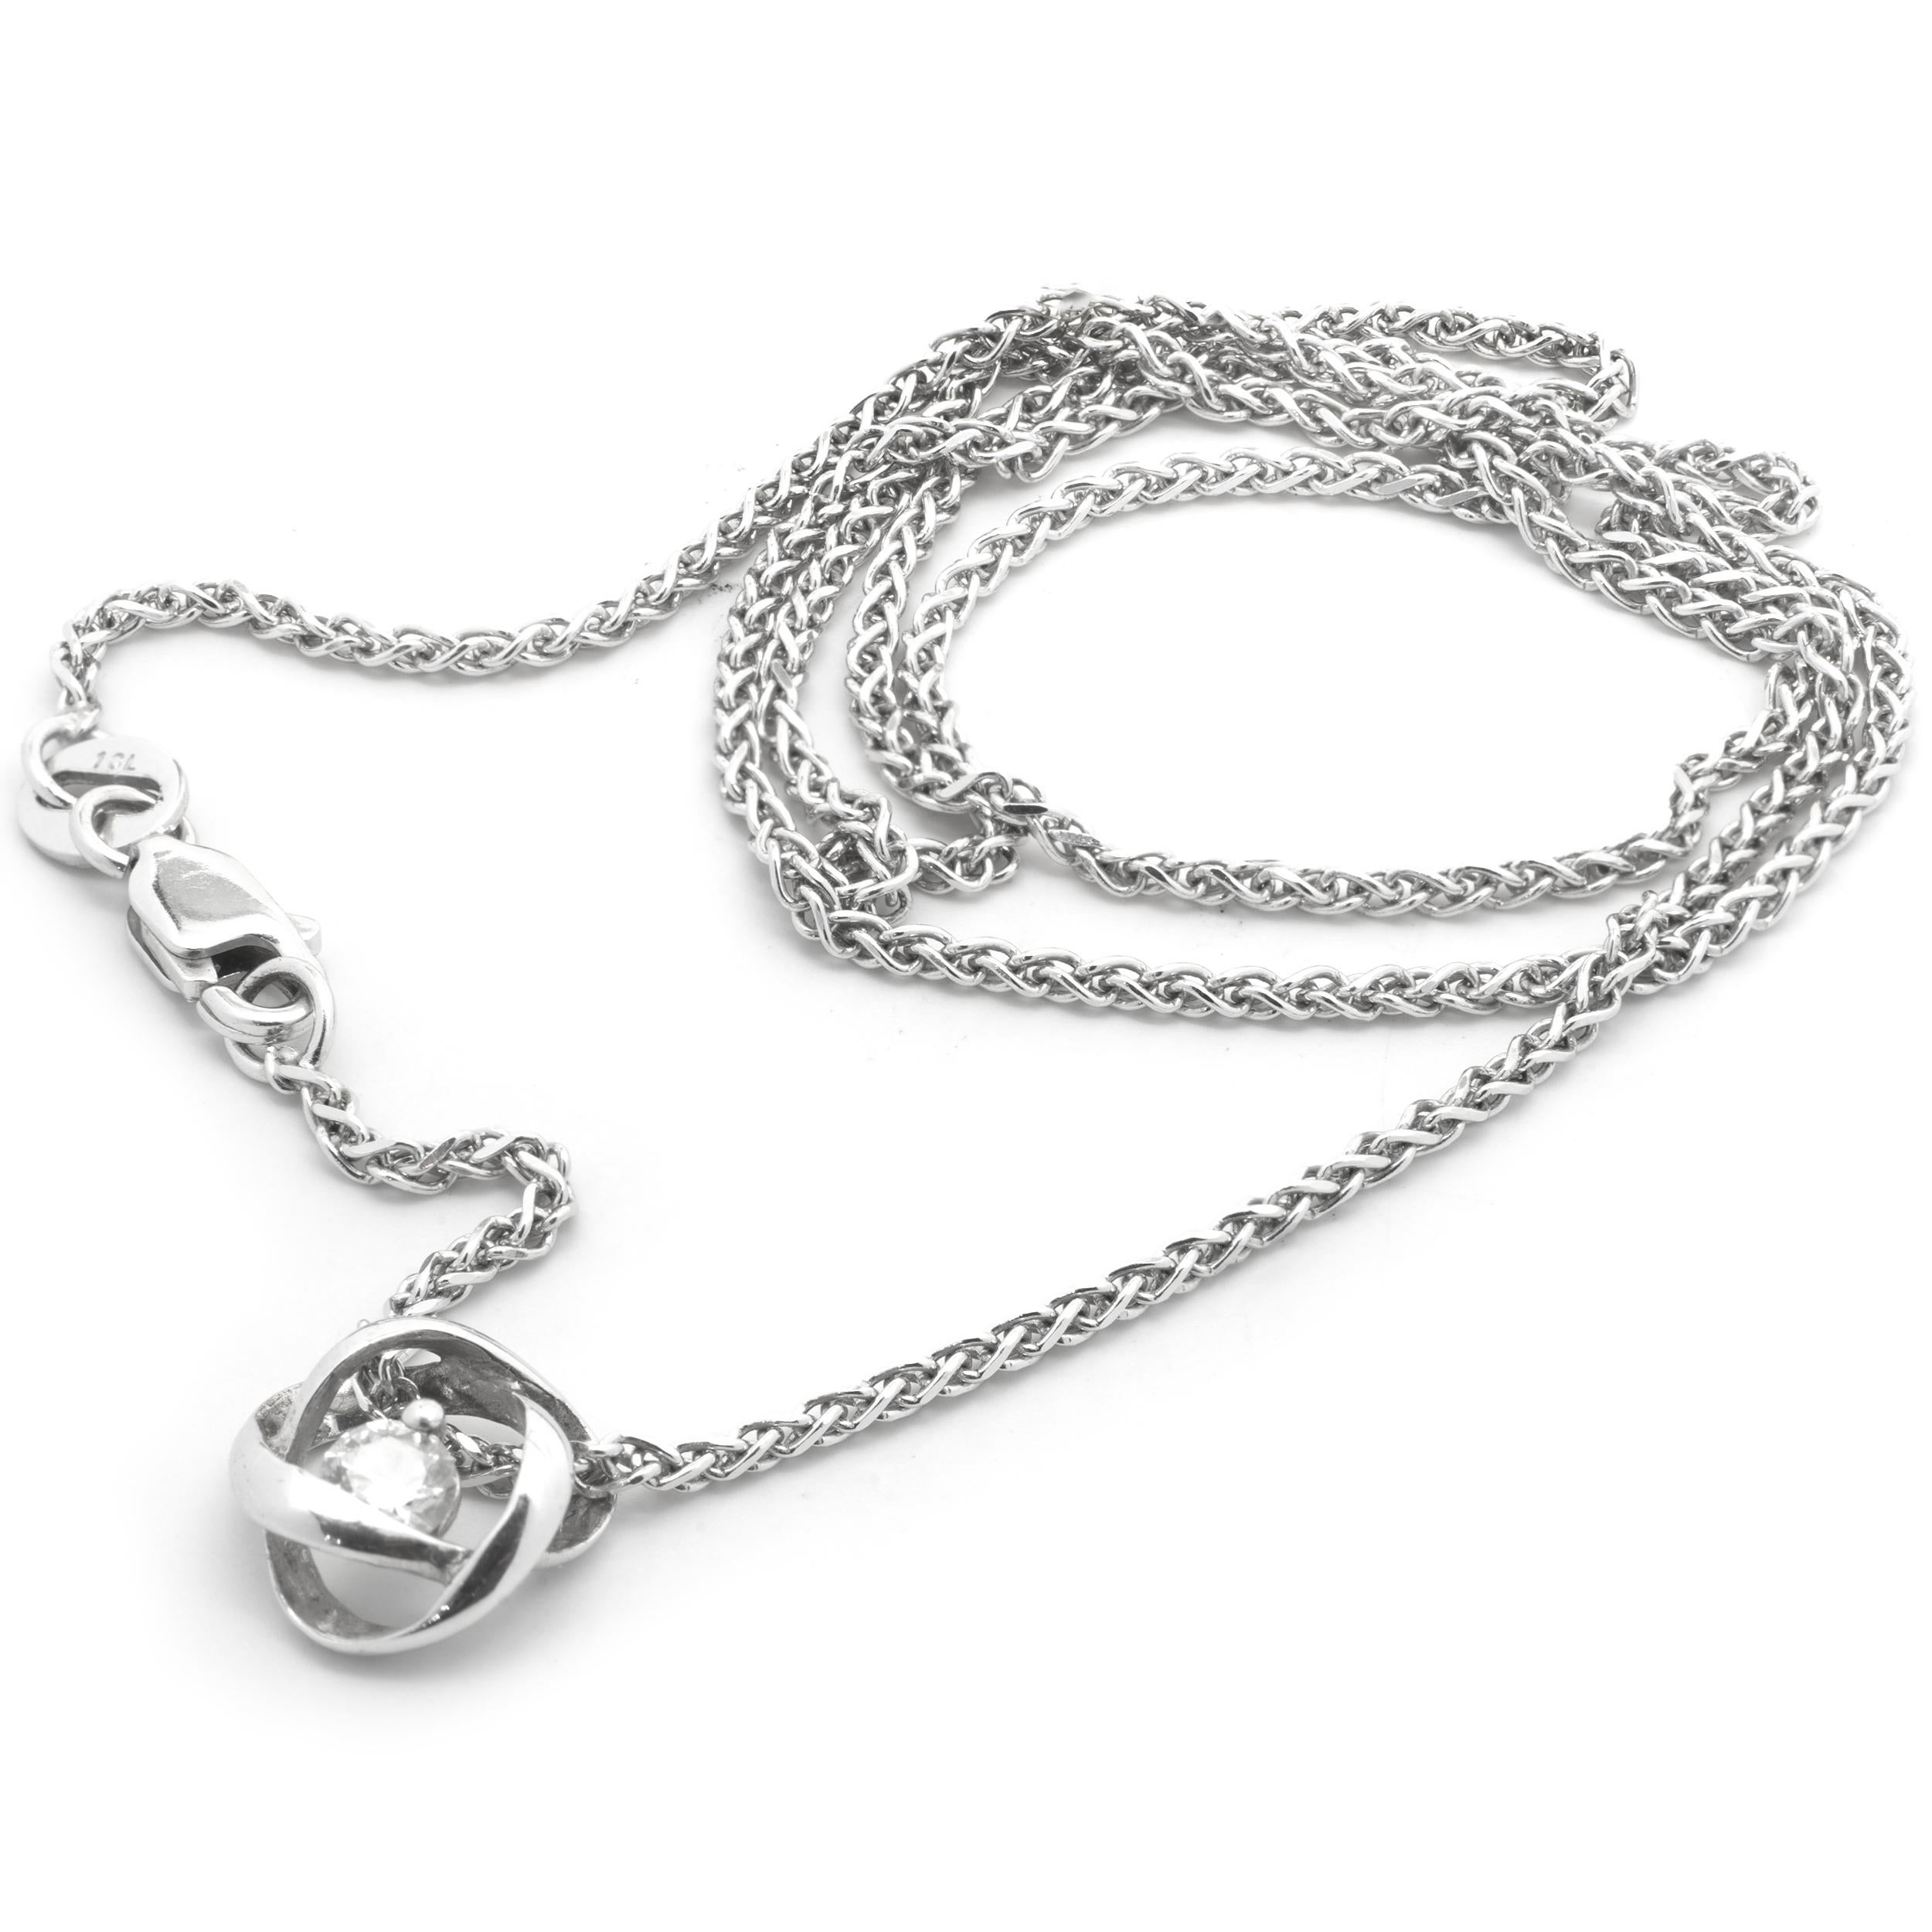 Designer: custom design
Material: 14K white gold
Diamonds: 1 round brilliant cut = .15cttw
Color: I
Clarity: SI1
Dimensions: necklace measures 18-inches in length 
Weight: 4.26 grams
